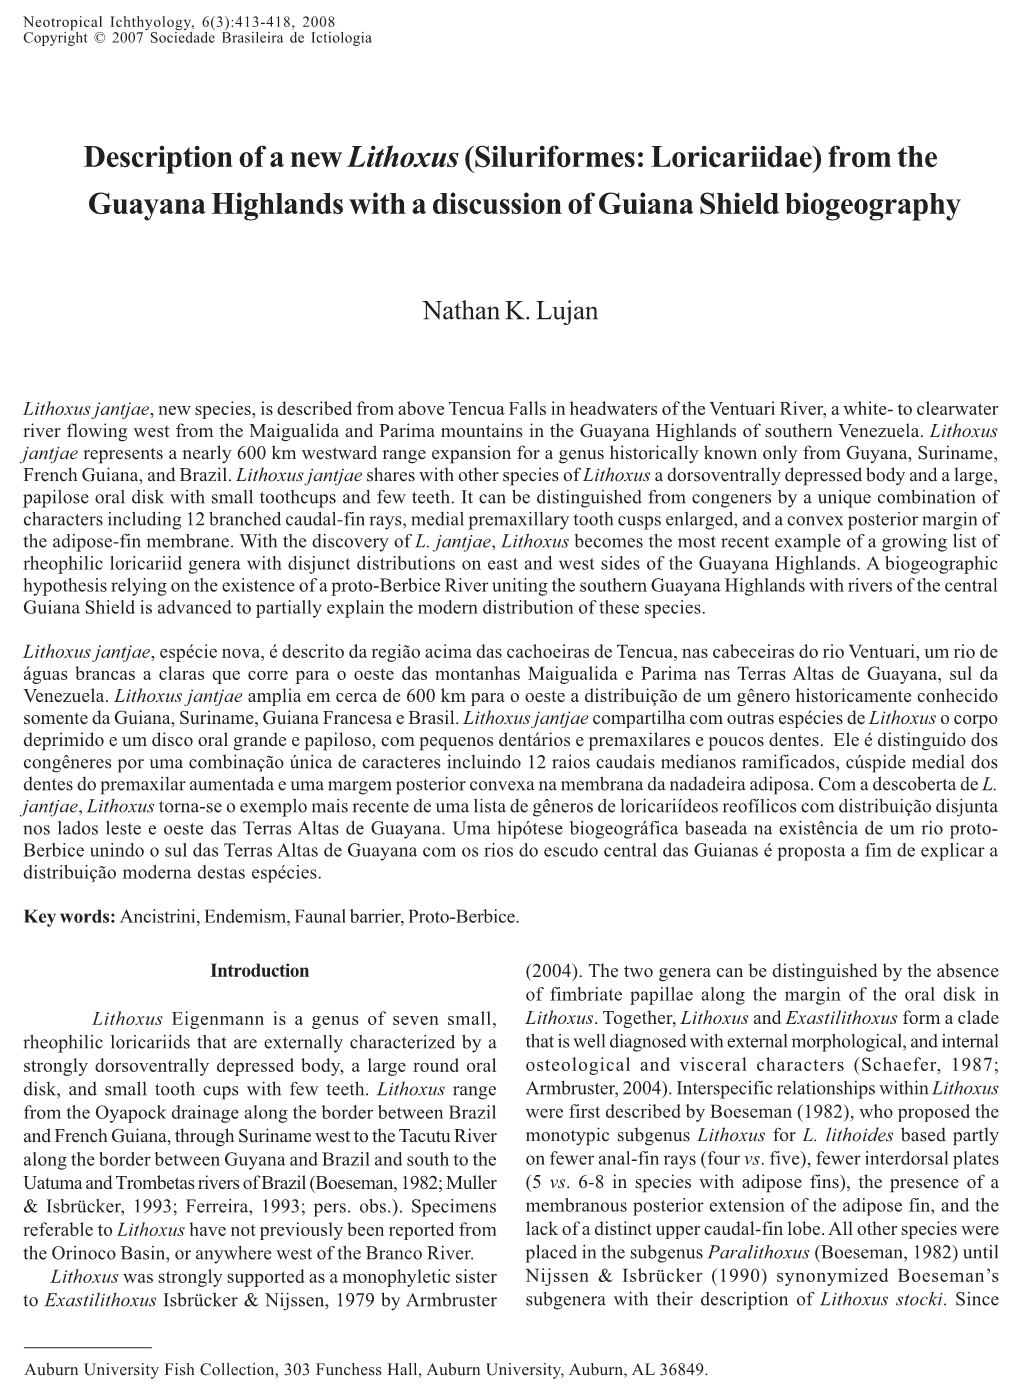 Description of a New Lithoxus (Siluriformes: Loricariidae) from the Guayana Highlands with a Discussion of Guiana Shield Biogeography